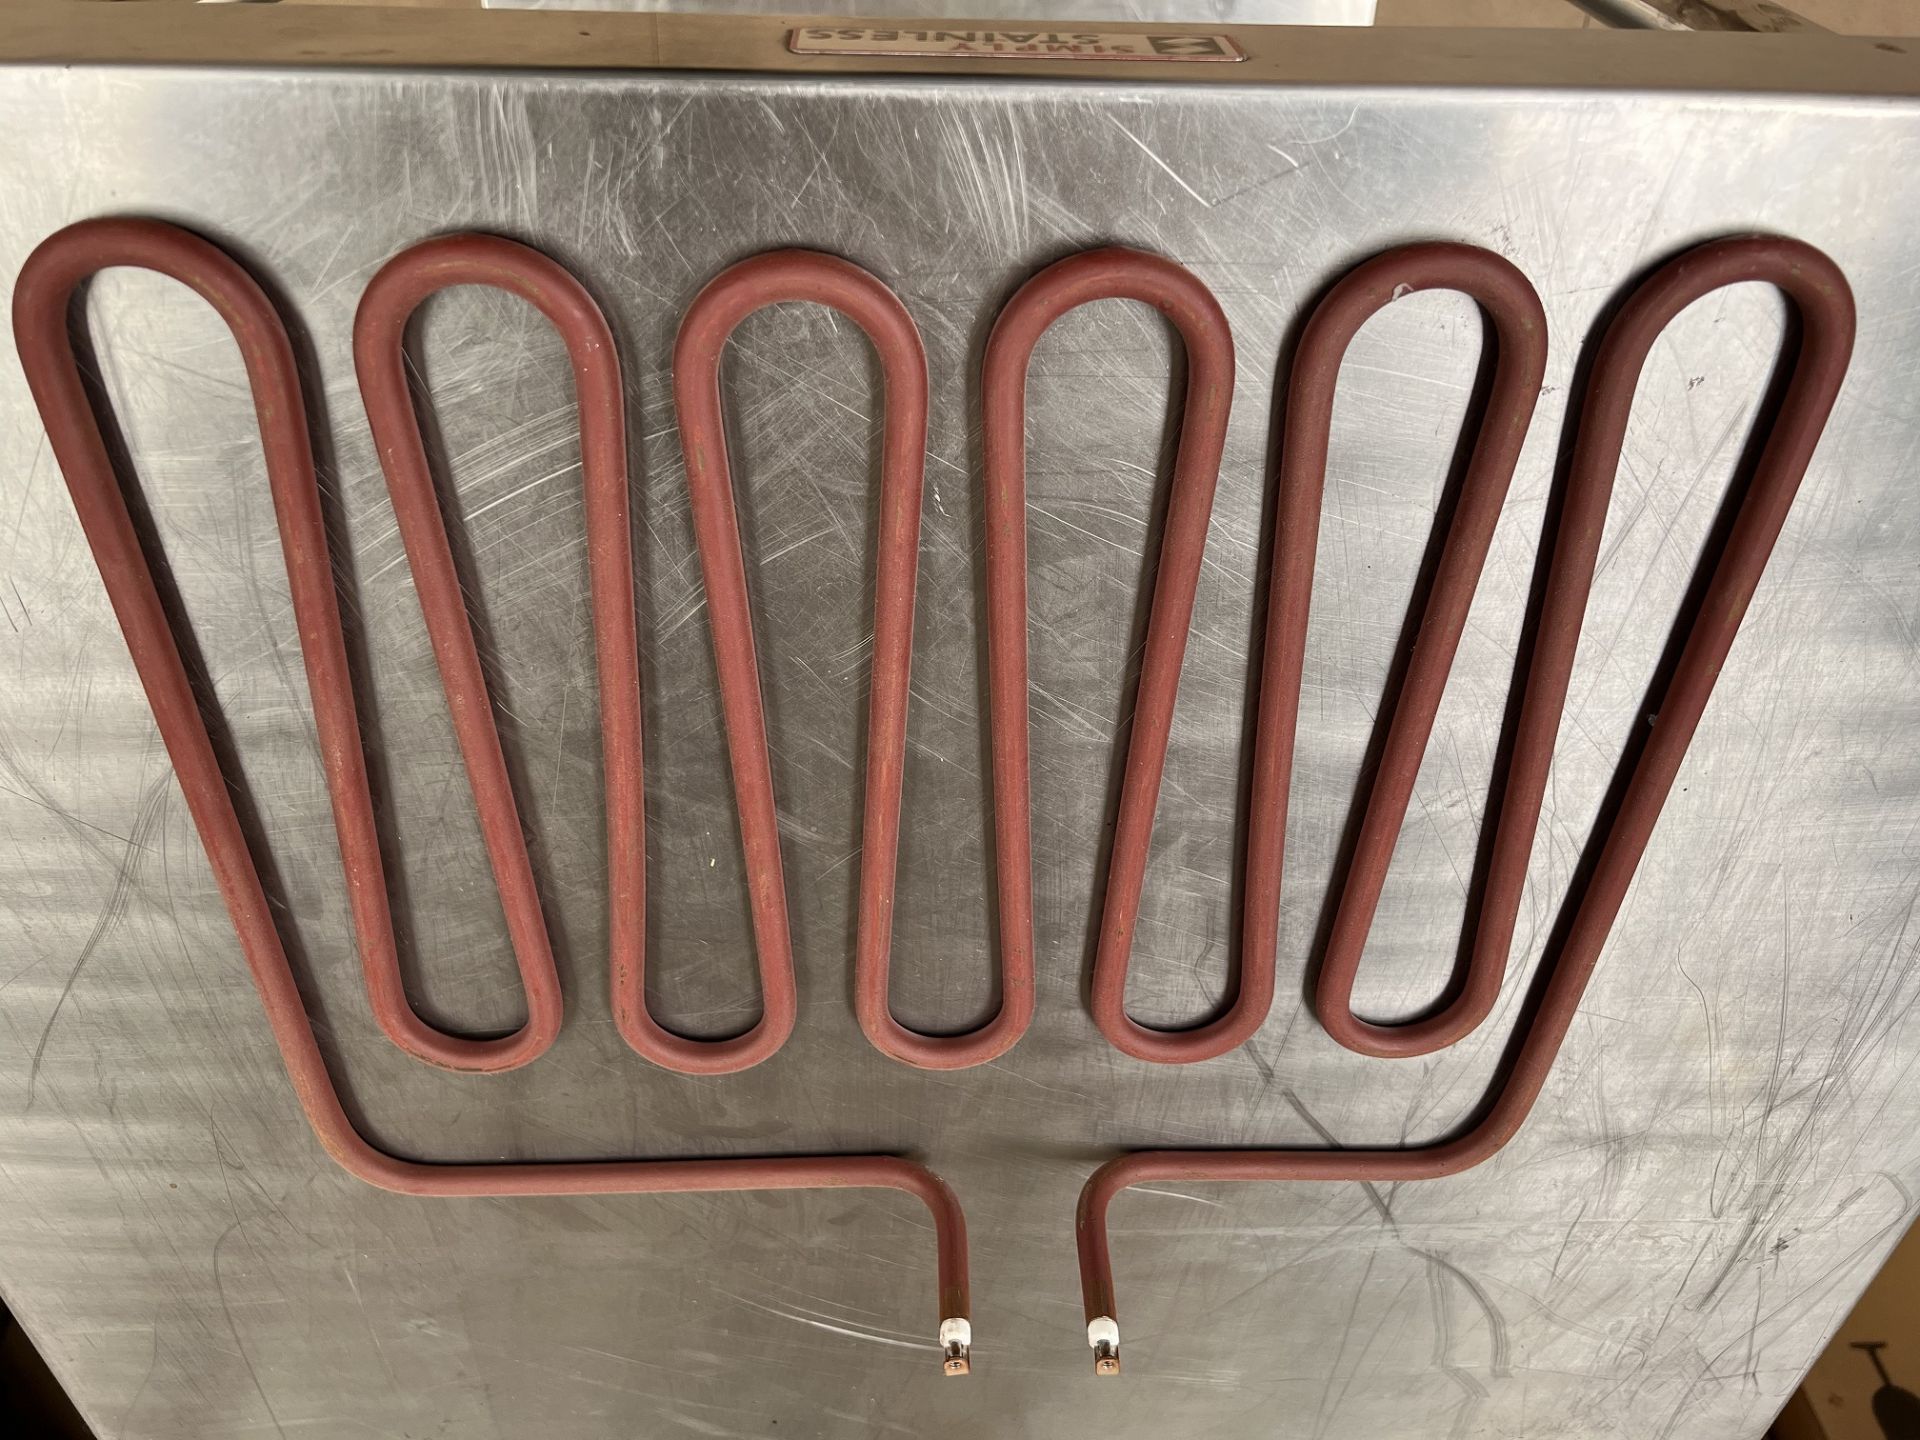 New 3 Kw Universal Griddle Element